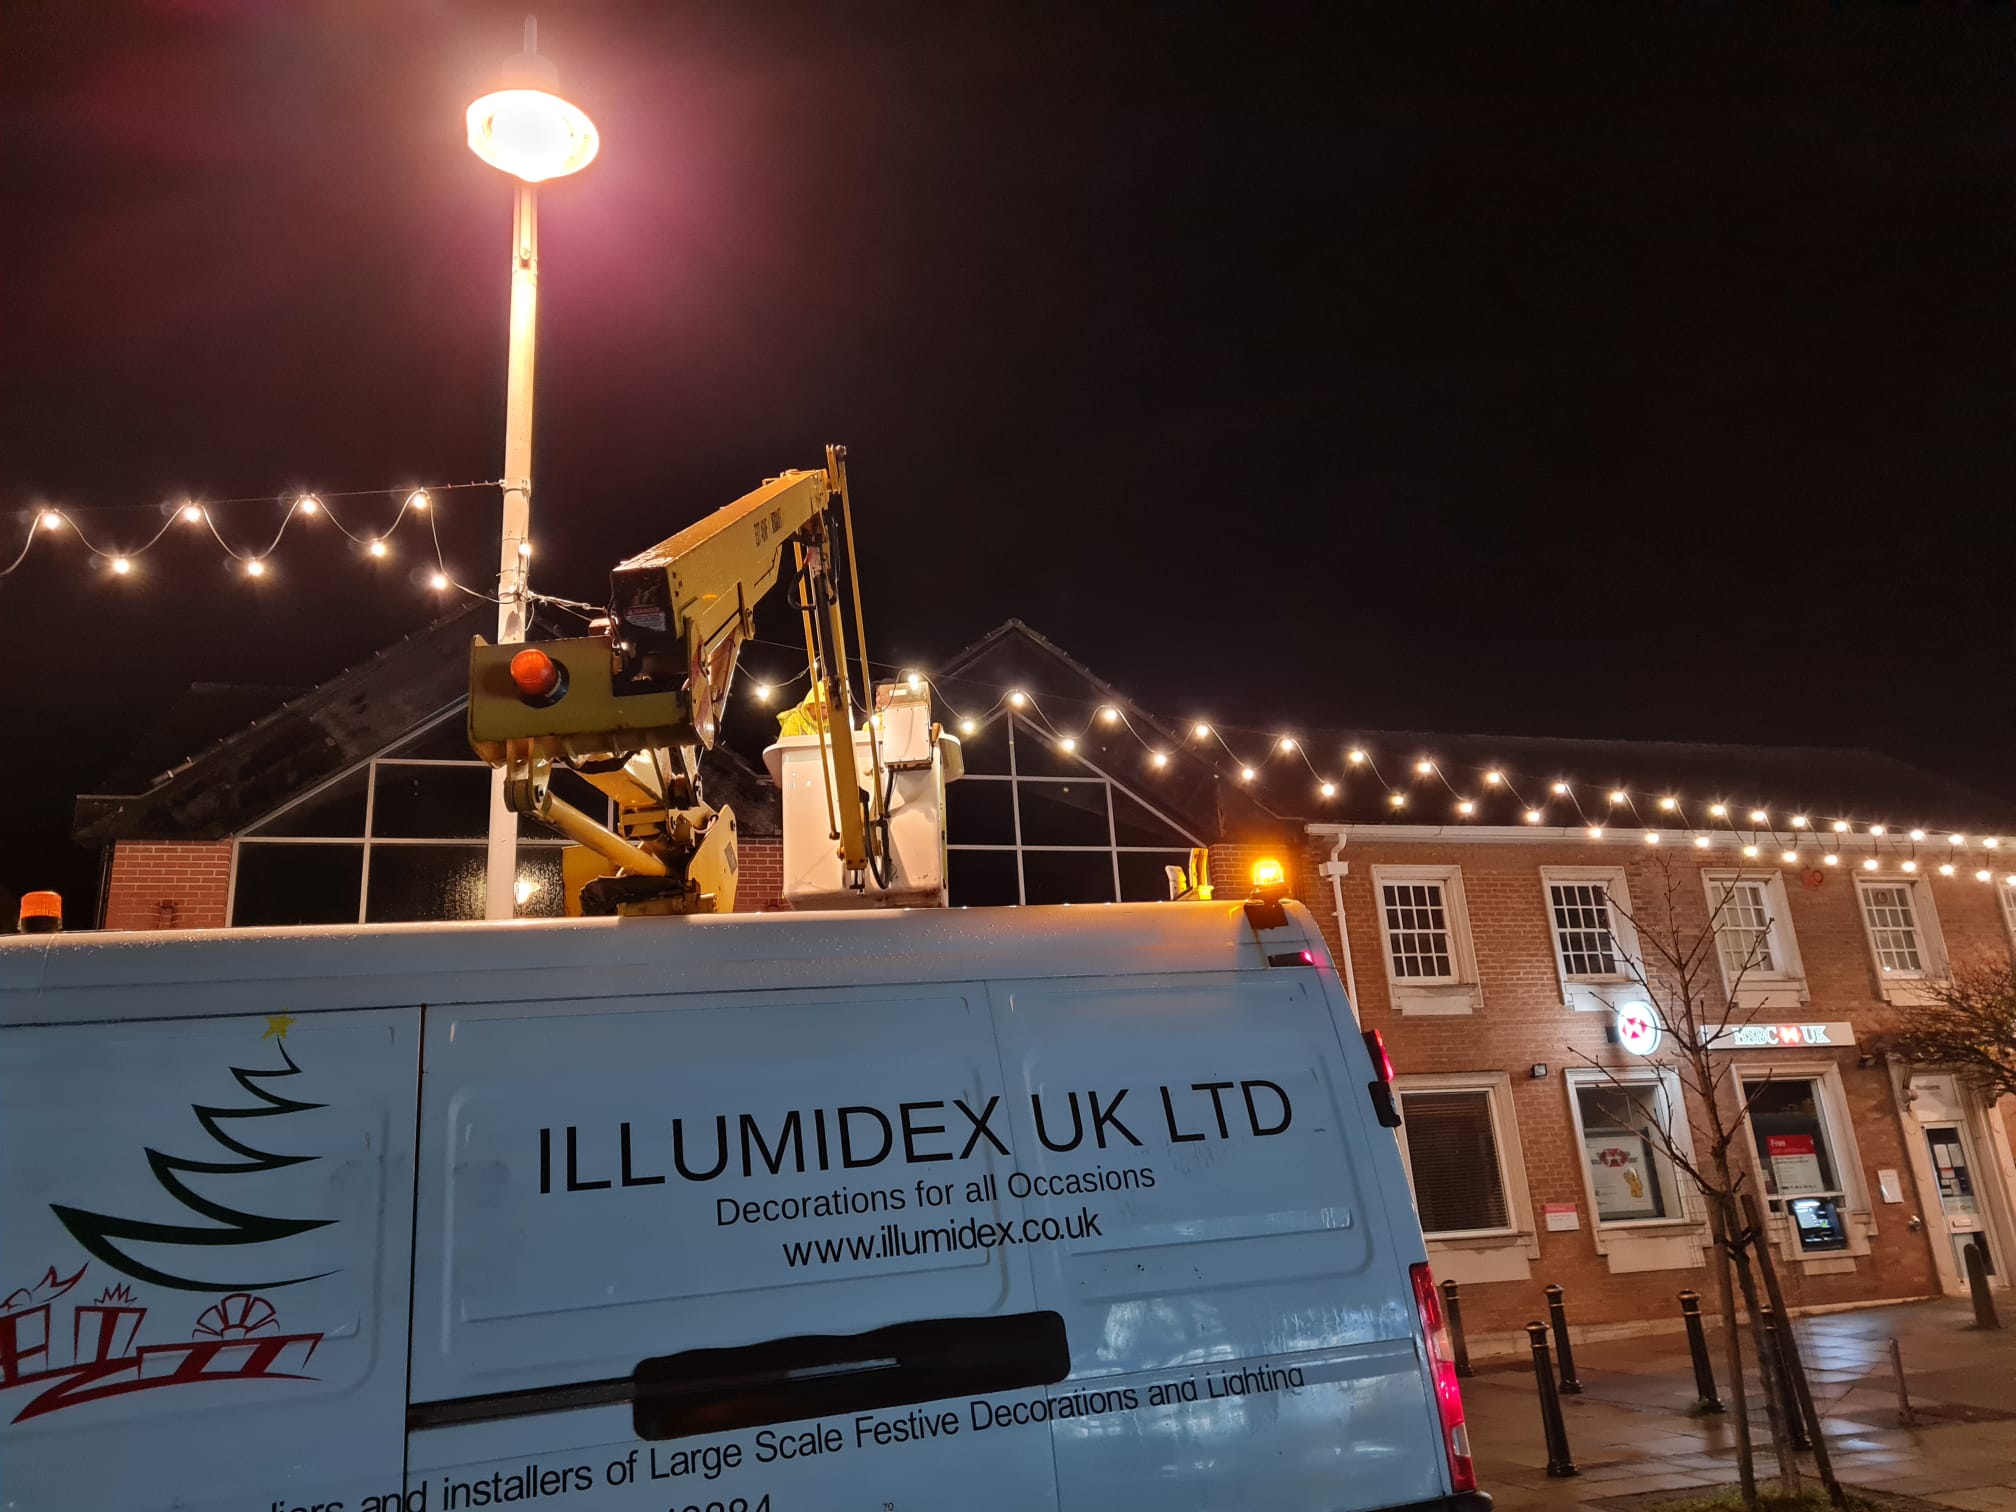 IllumiDex UK L;td has won the contract to install Christmas decorations in Formby